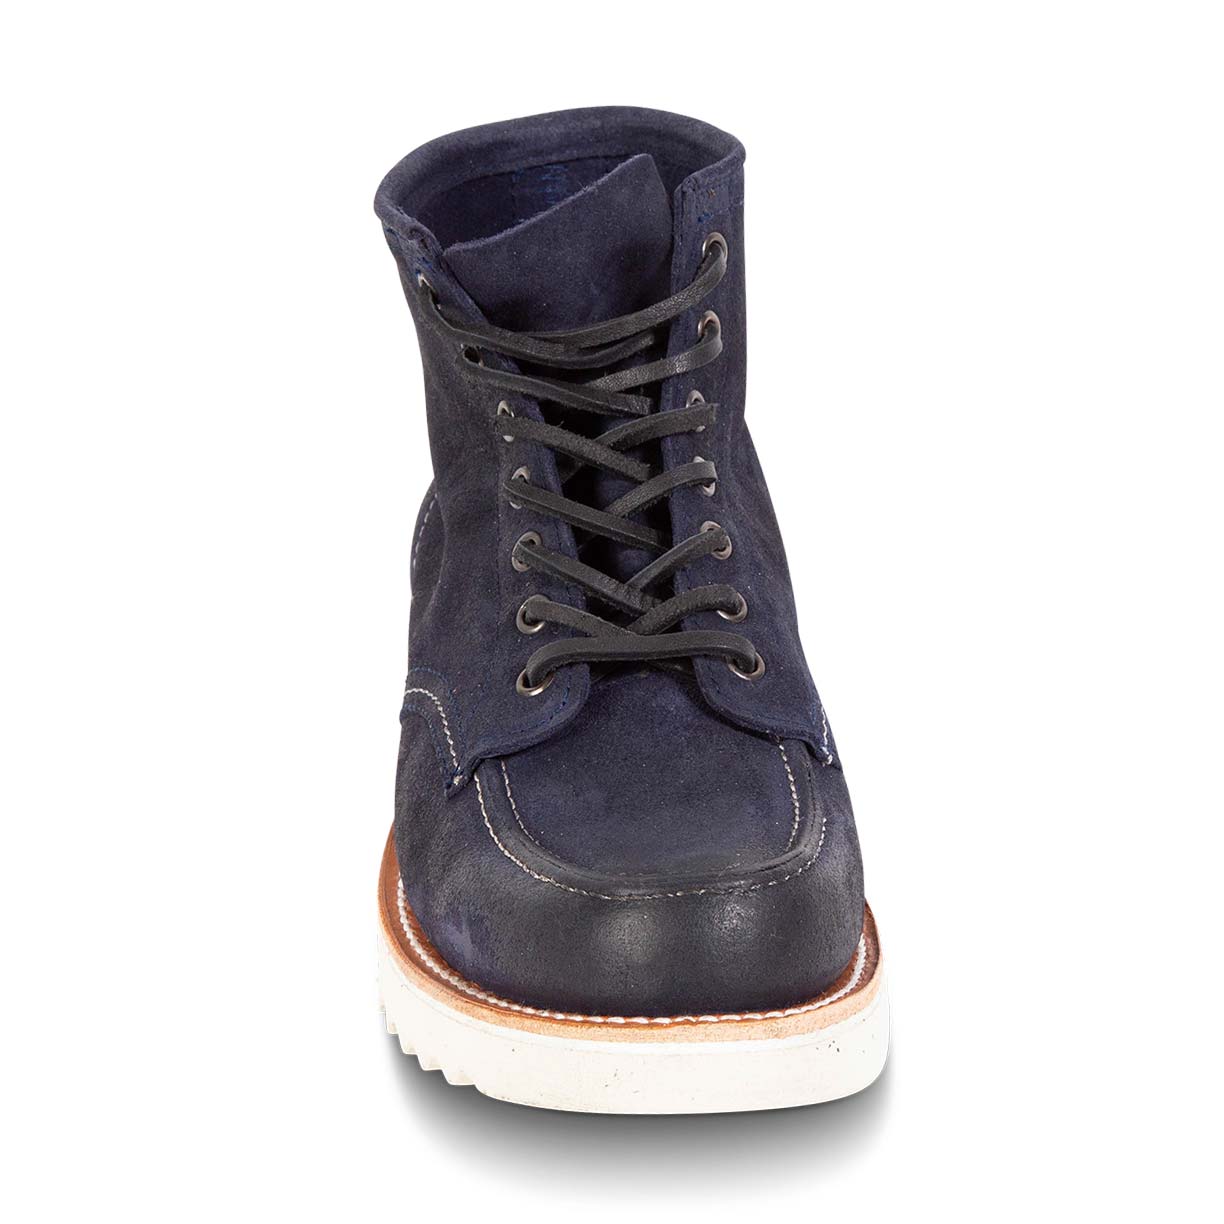 Front view showing suede tongue construction and adjustable leather lace closure on FREEBIRD men's Carbon navy suede shoe